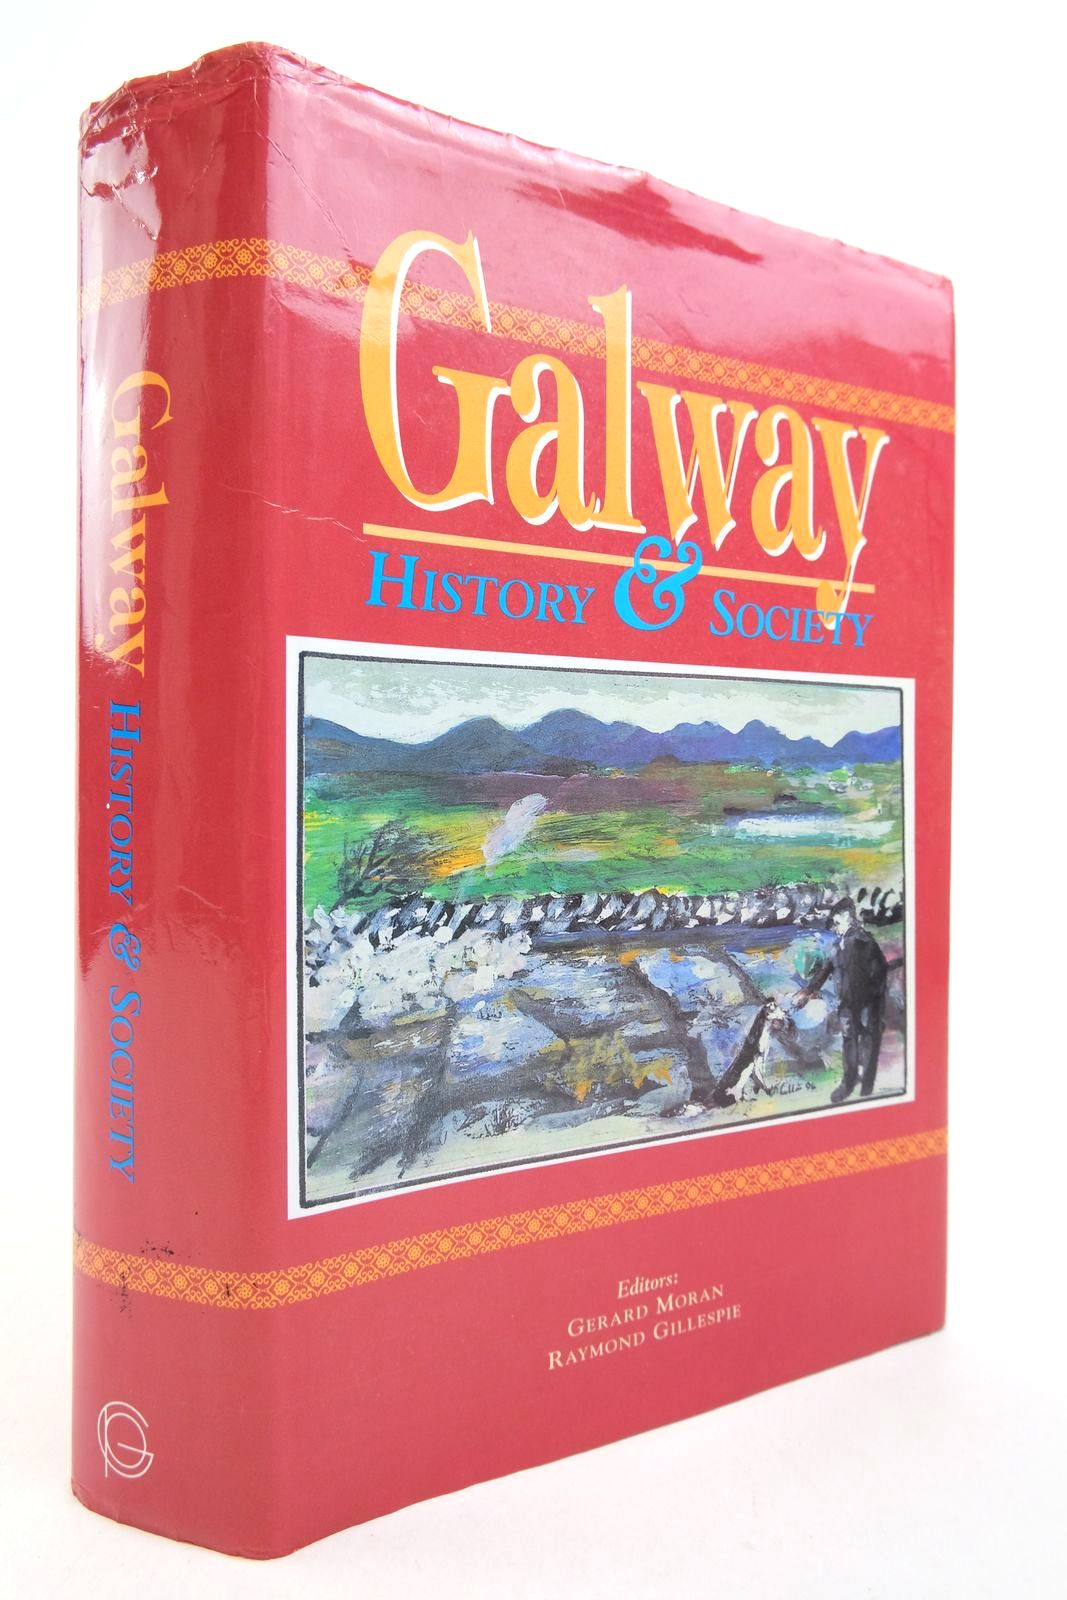 Photo of GALWAY: HISTORY &amp; SOCIETY written by Moran, Gerard Gillespie, Raymond Nolan, William published by Geography Publications (STOCK CODE: 2140591)  for sale by Stella & Rose's Books